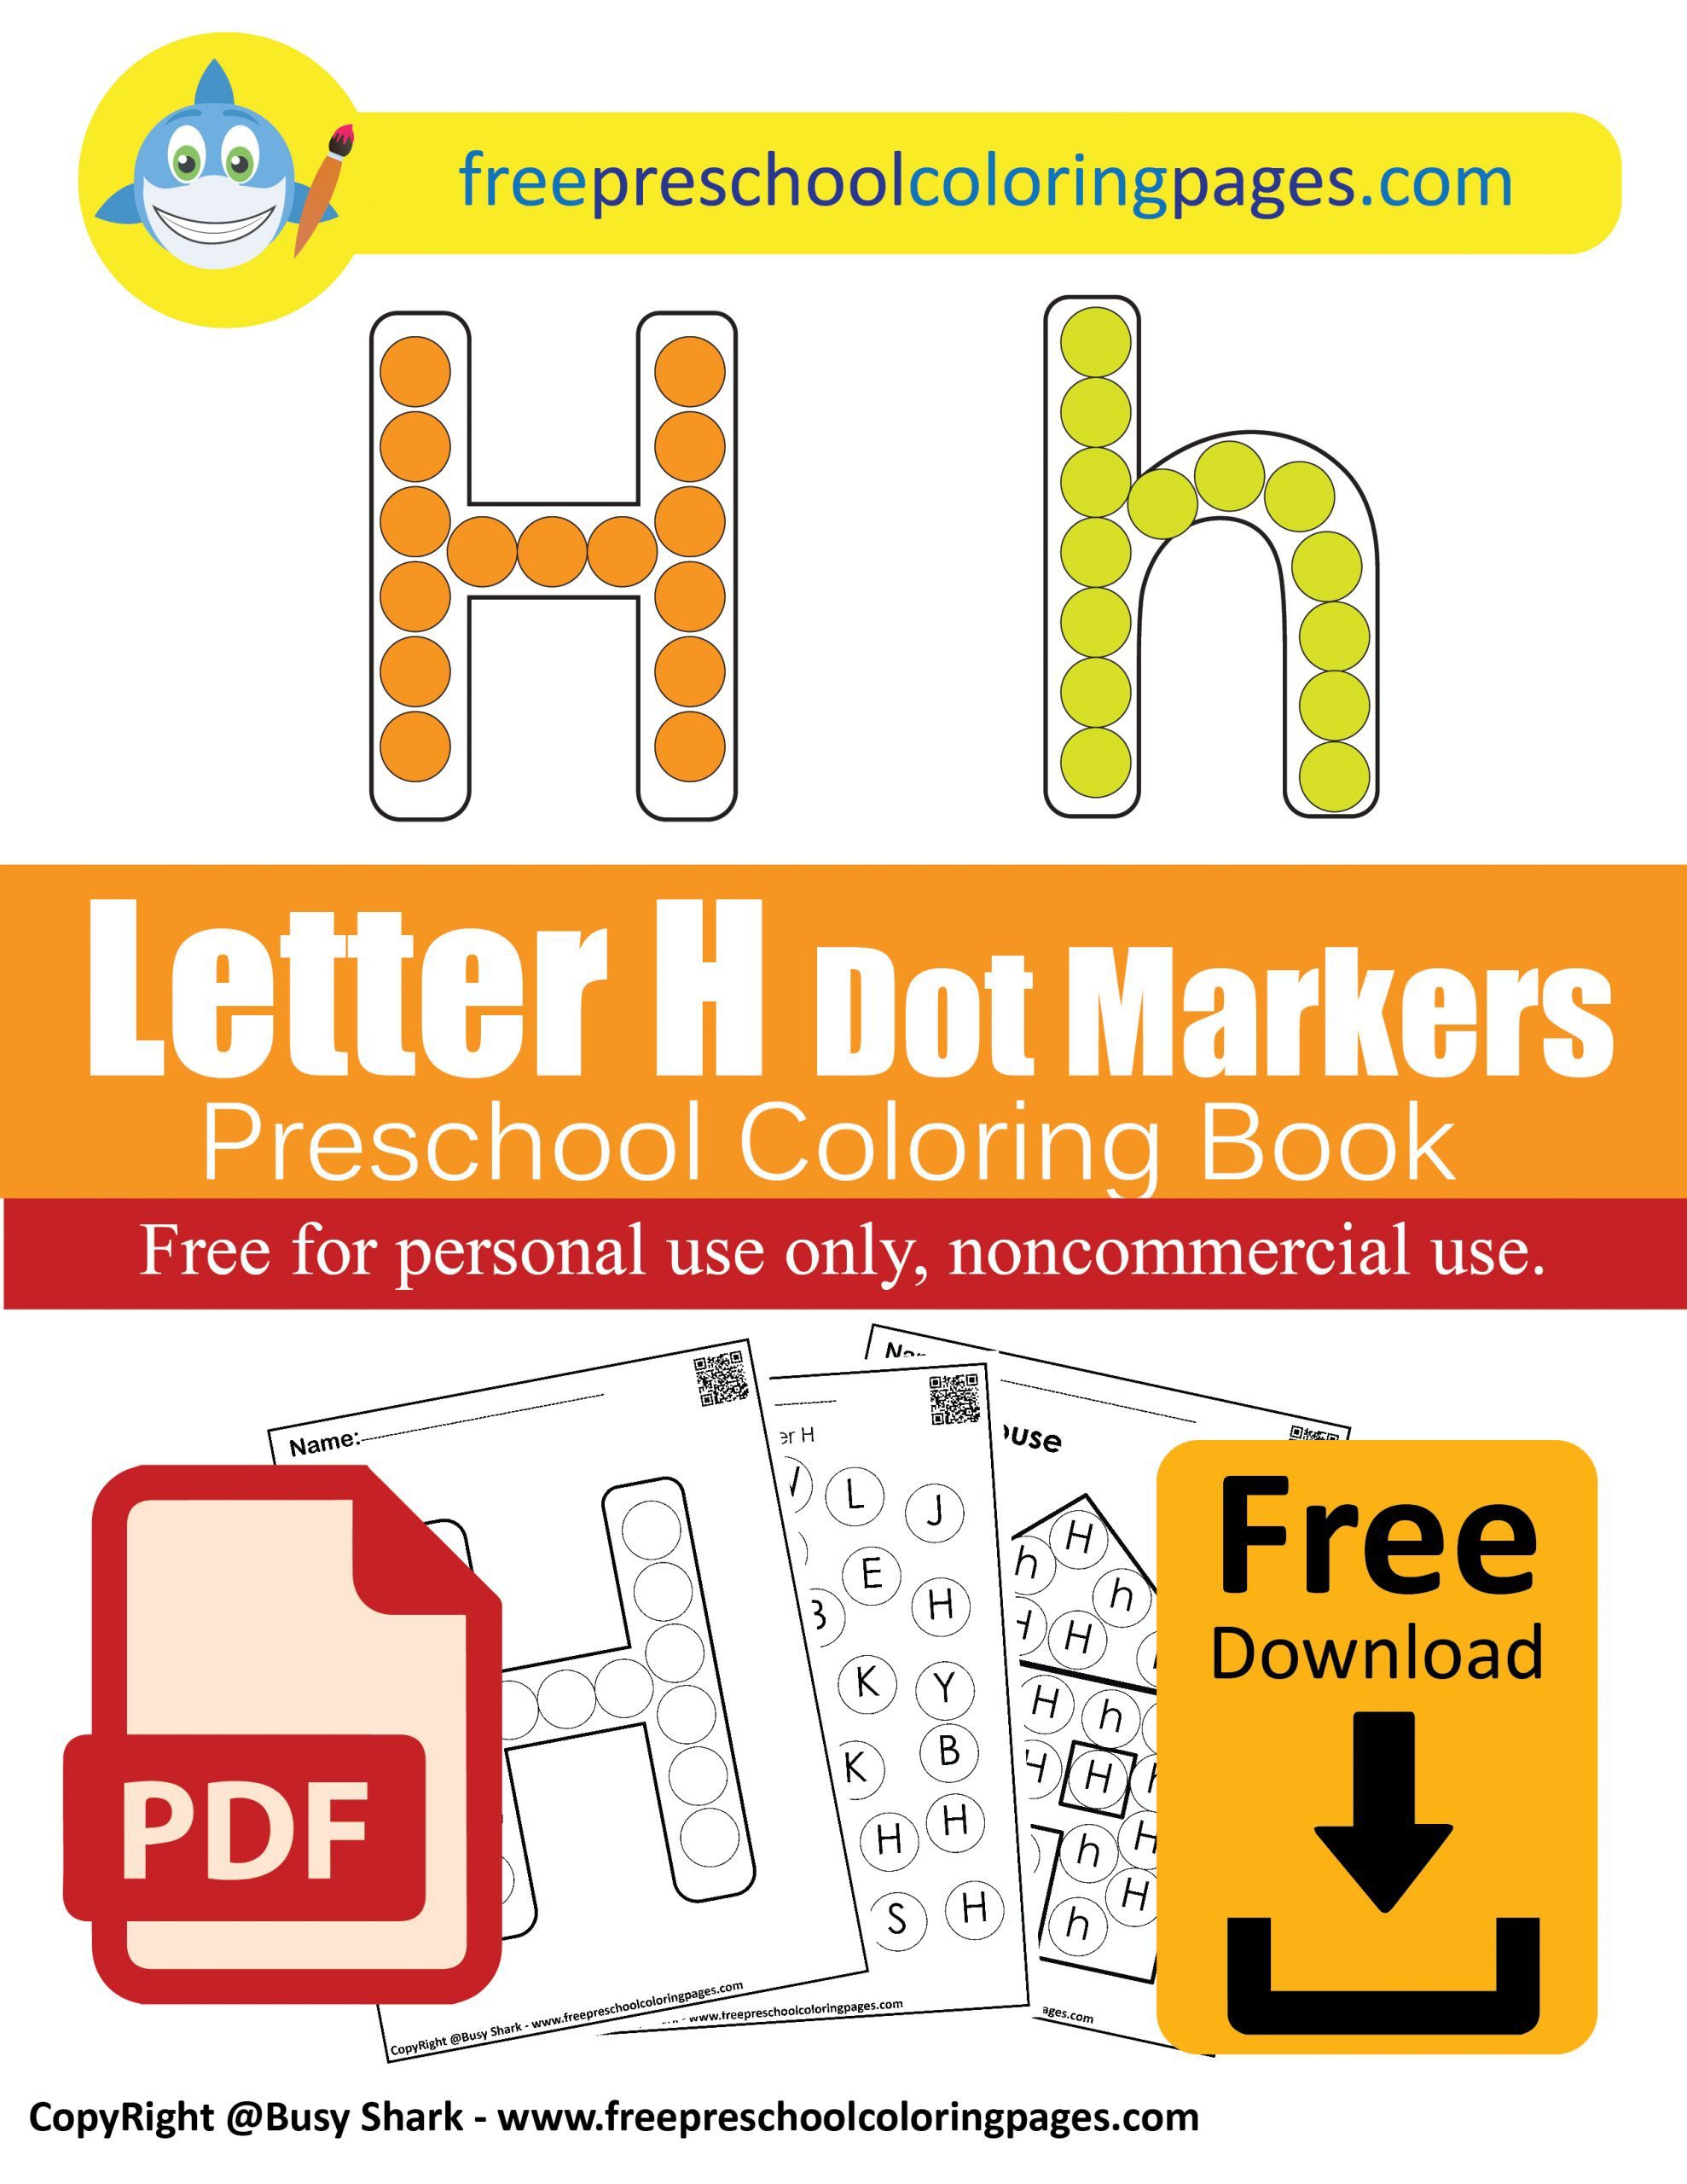 Letter h dot markers free coloring pages